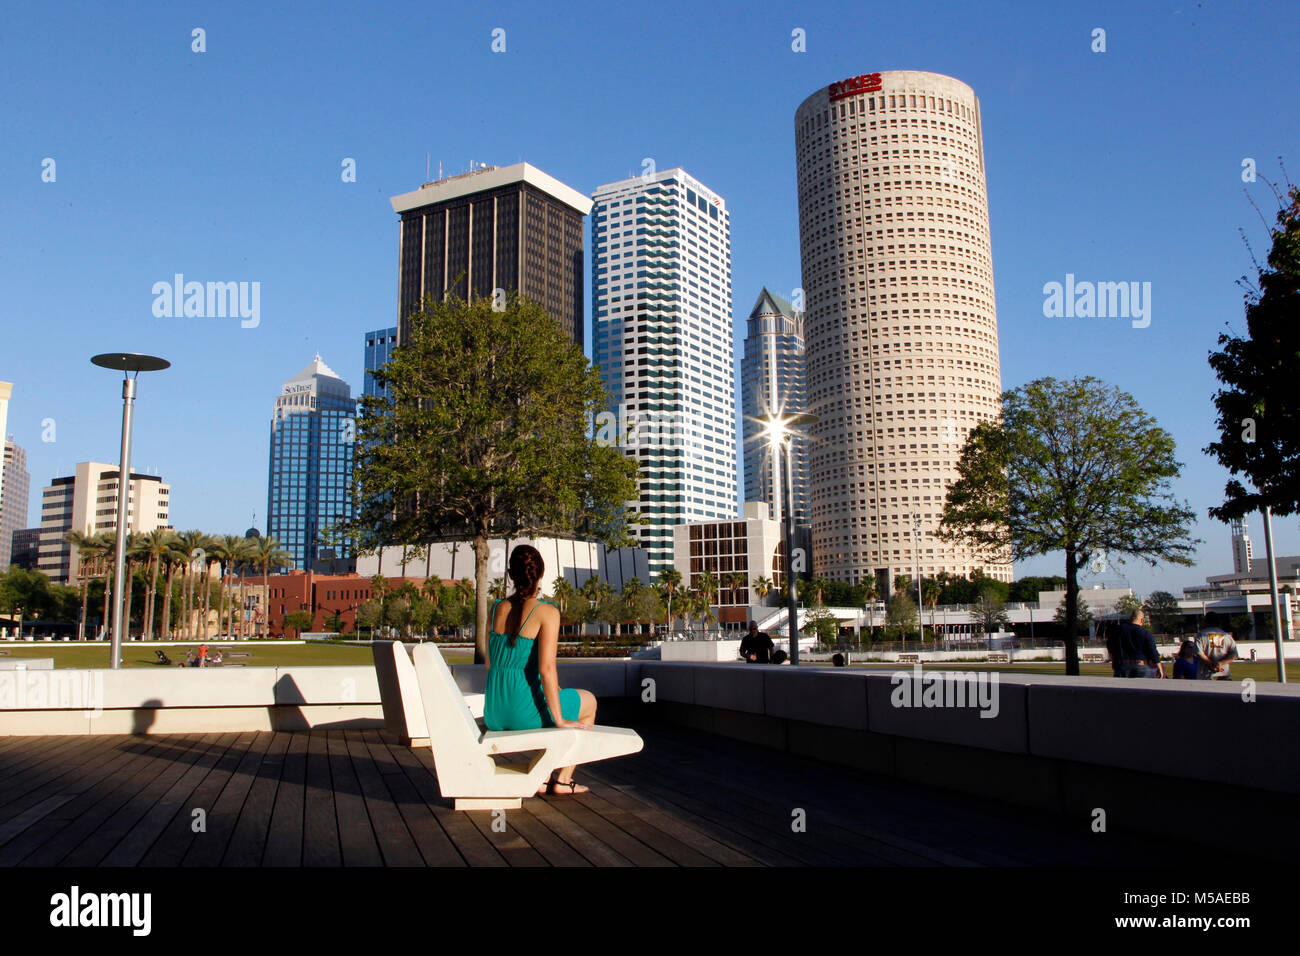 TAMPA, FLORIDA: Downtown Tampa landscape views from Curtis Hixon Park. Stock Photo